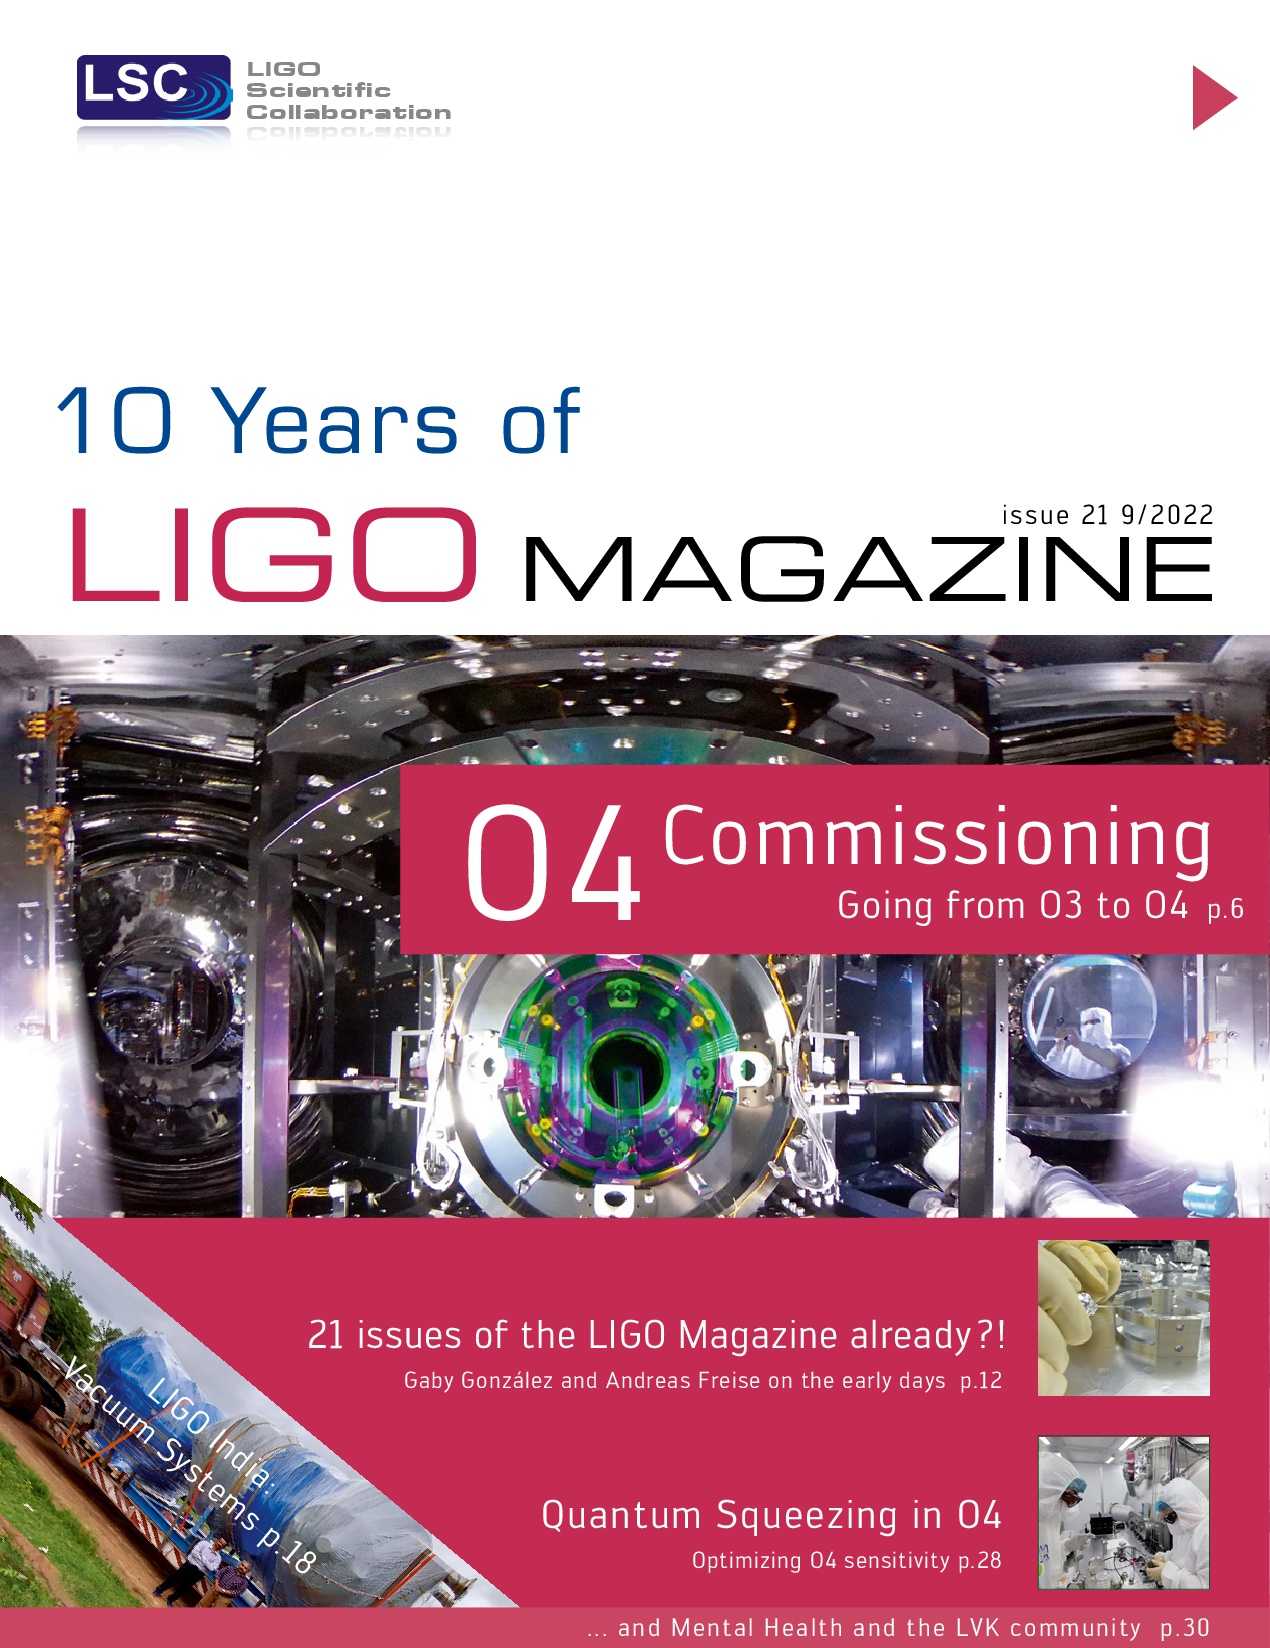 News-Image 0 of: New LIGO Magazine Issue 21 is out